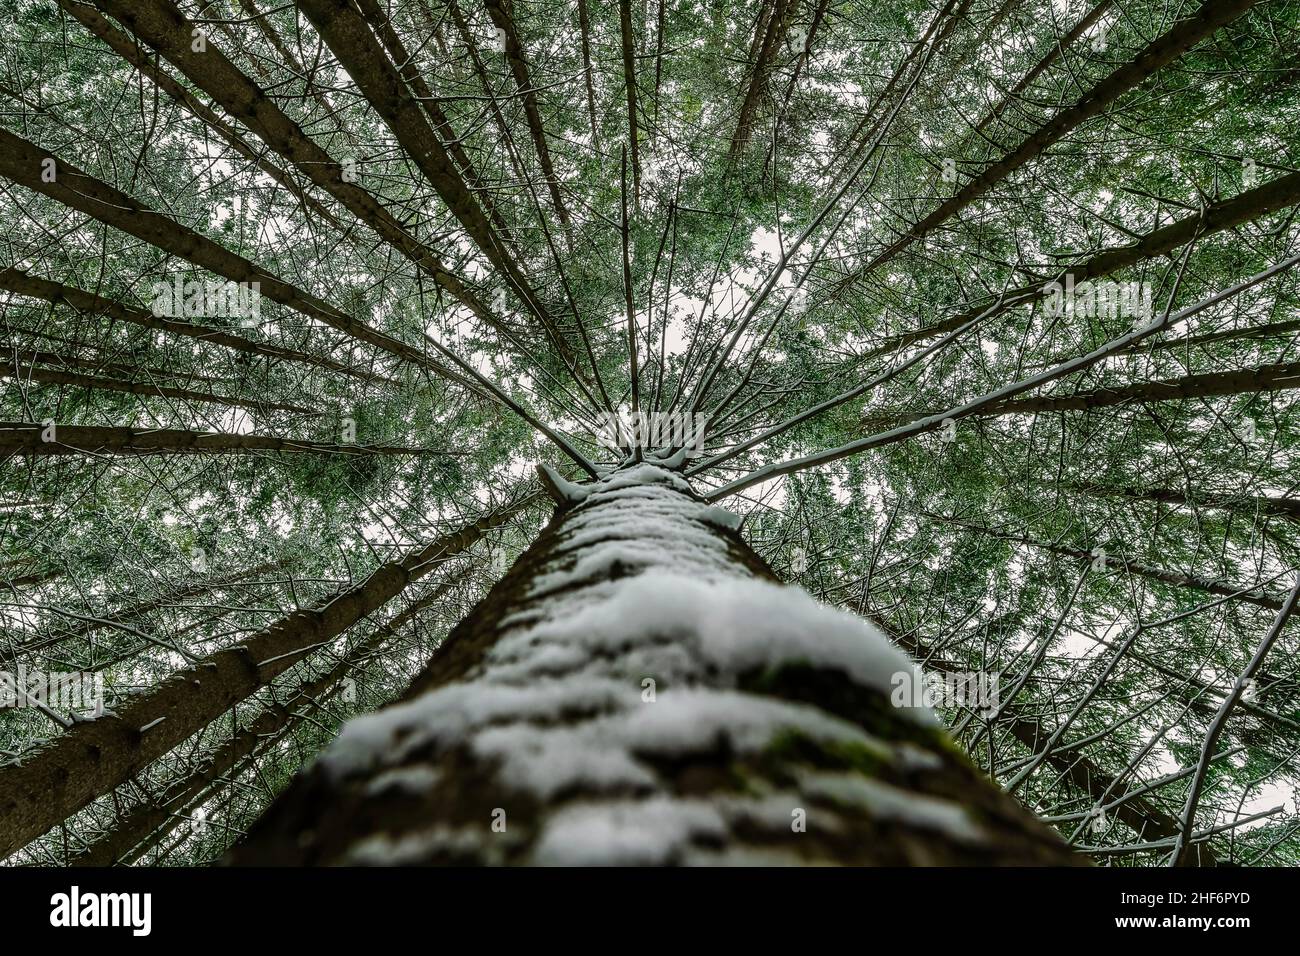 Snow covered tree perspective impressive view looking up as a symbol for a height-concept. Stock Photo